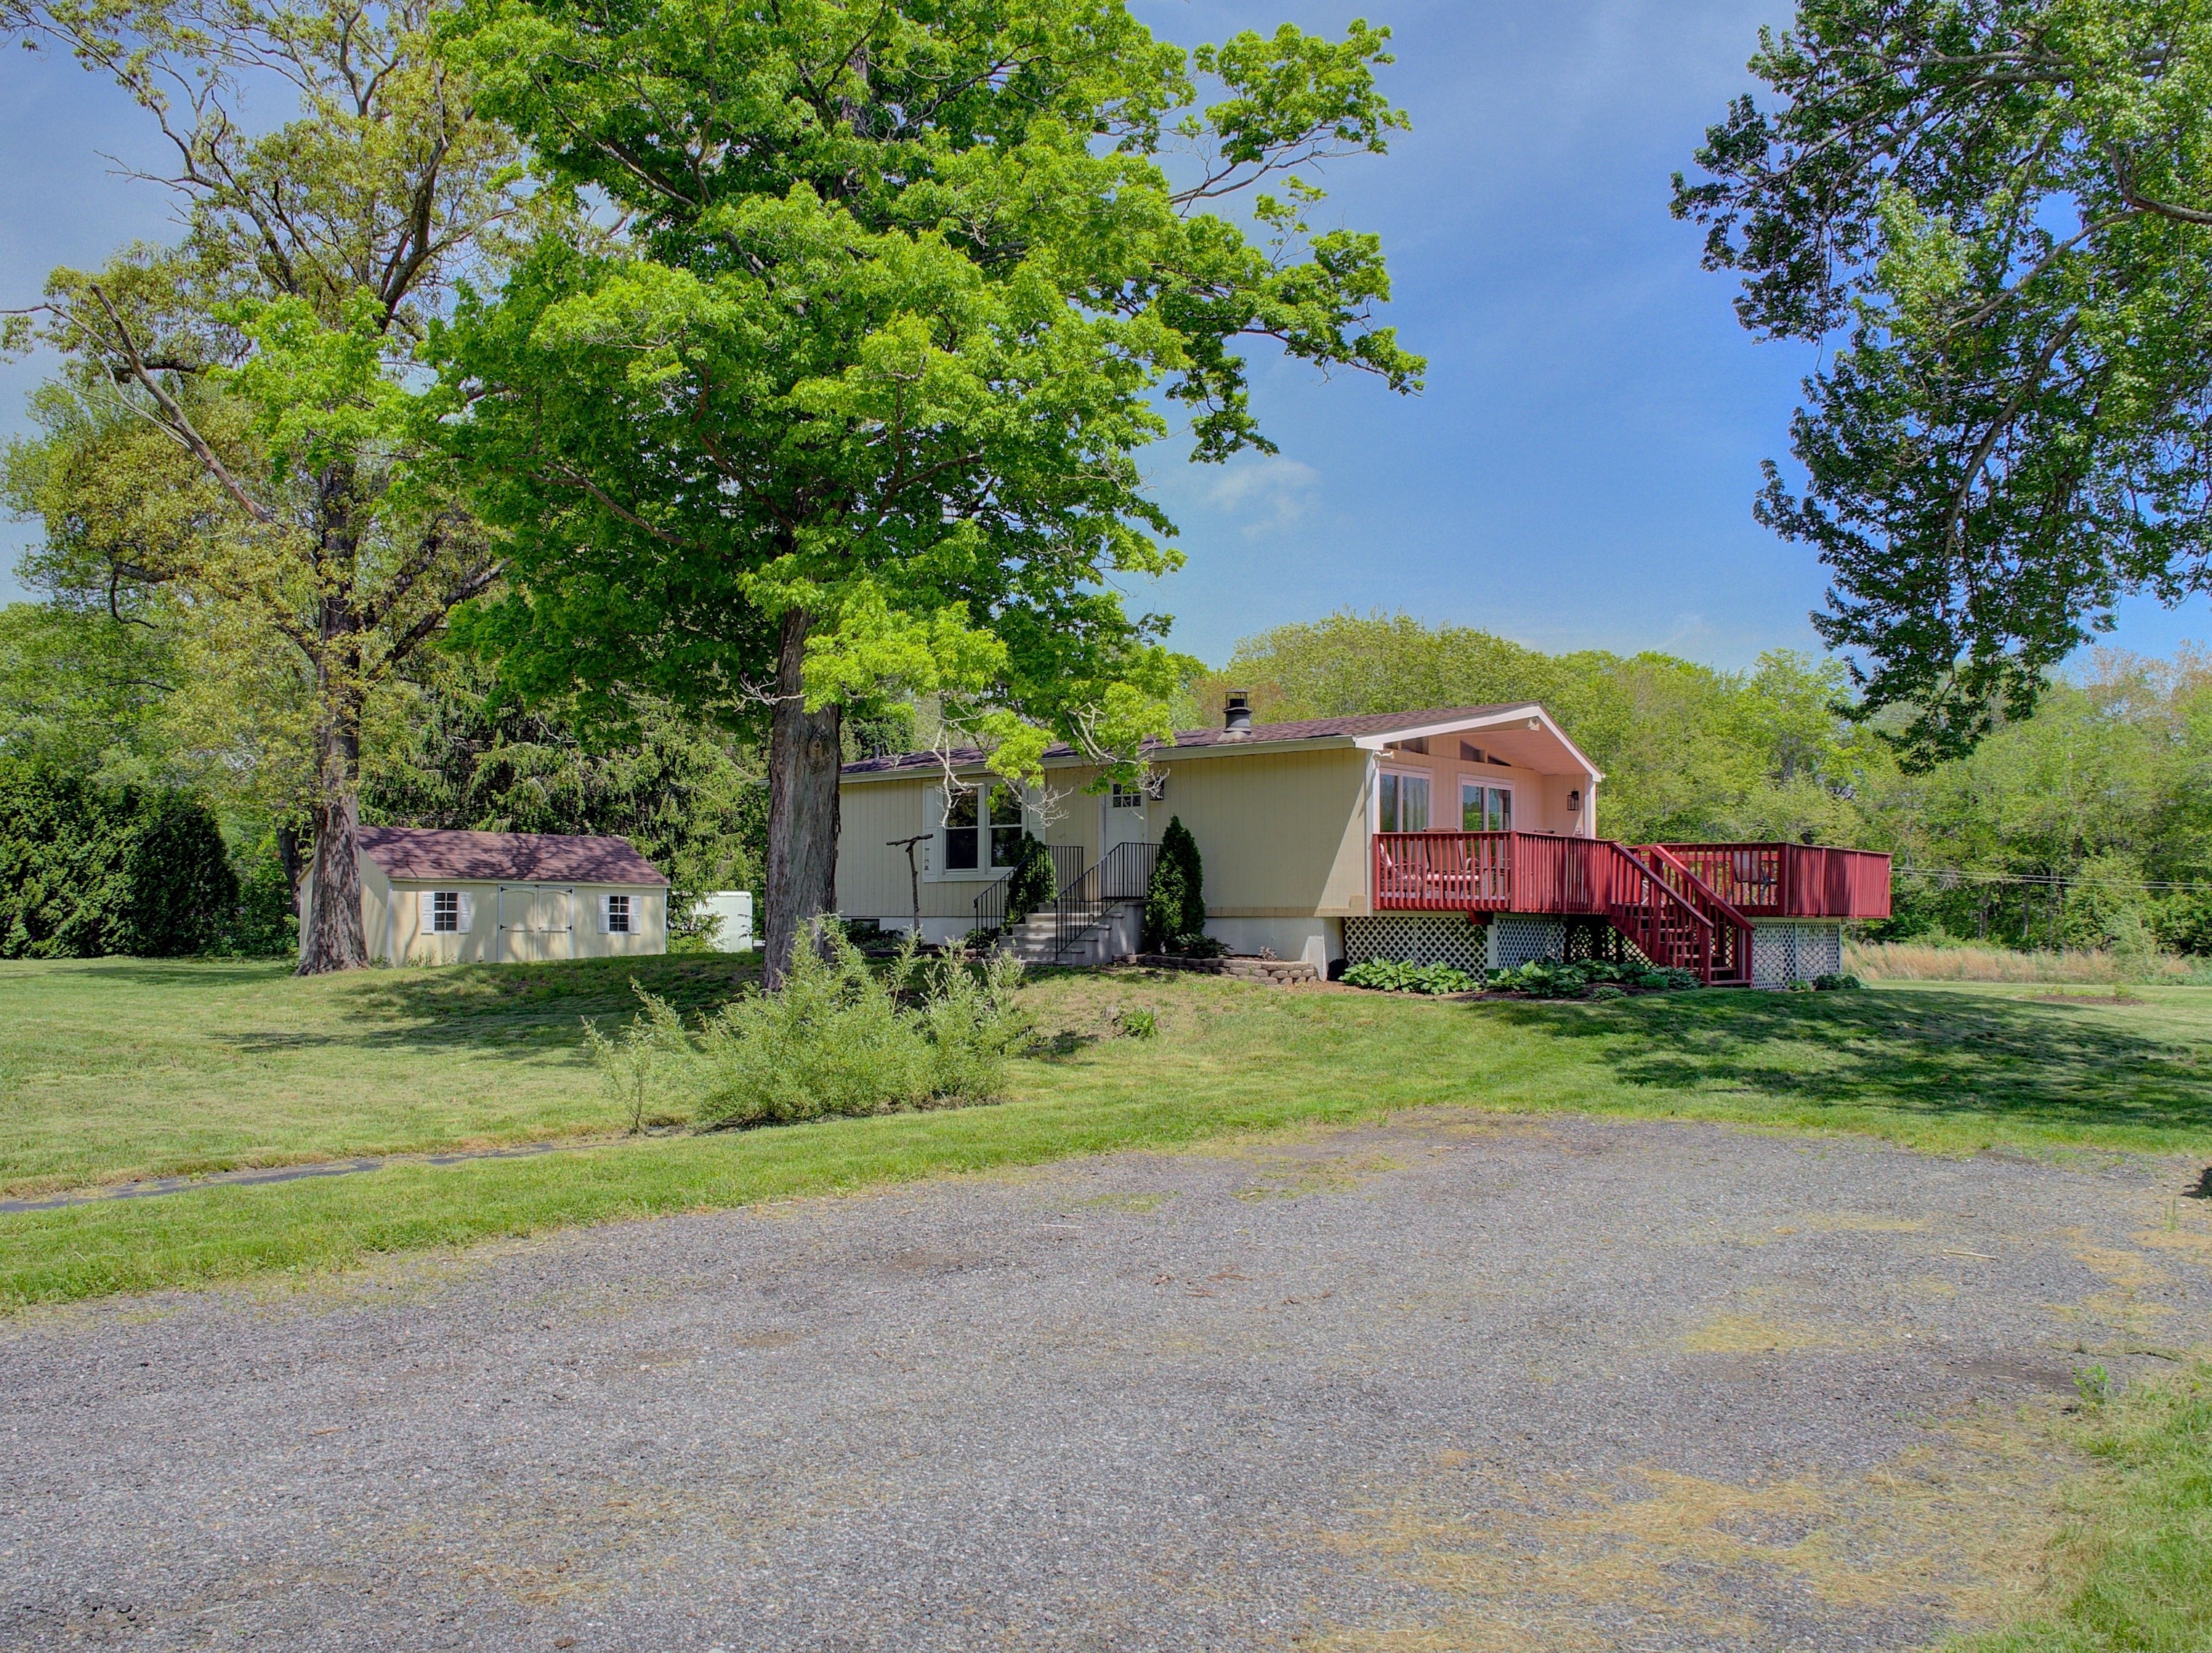 334 Shewville Rd, Gales Ferry, CT 06339